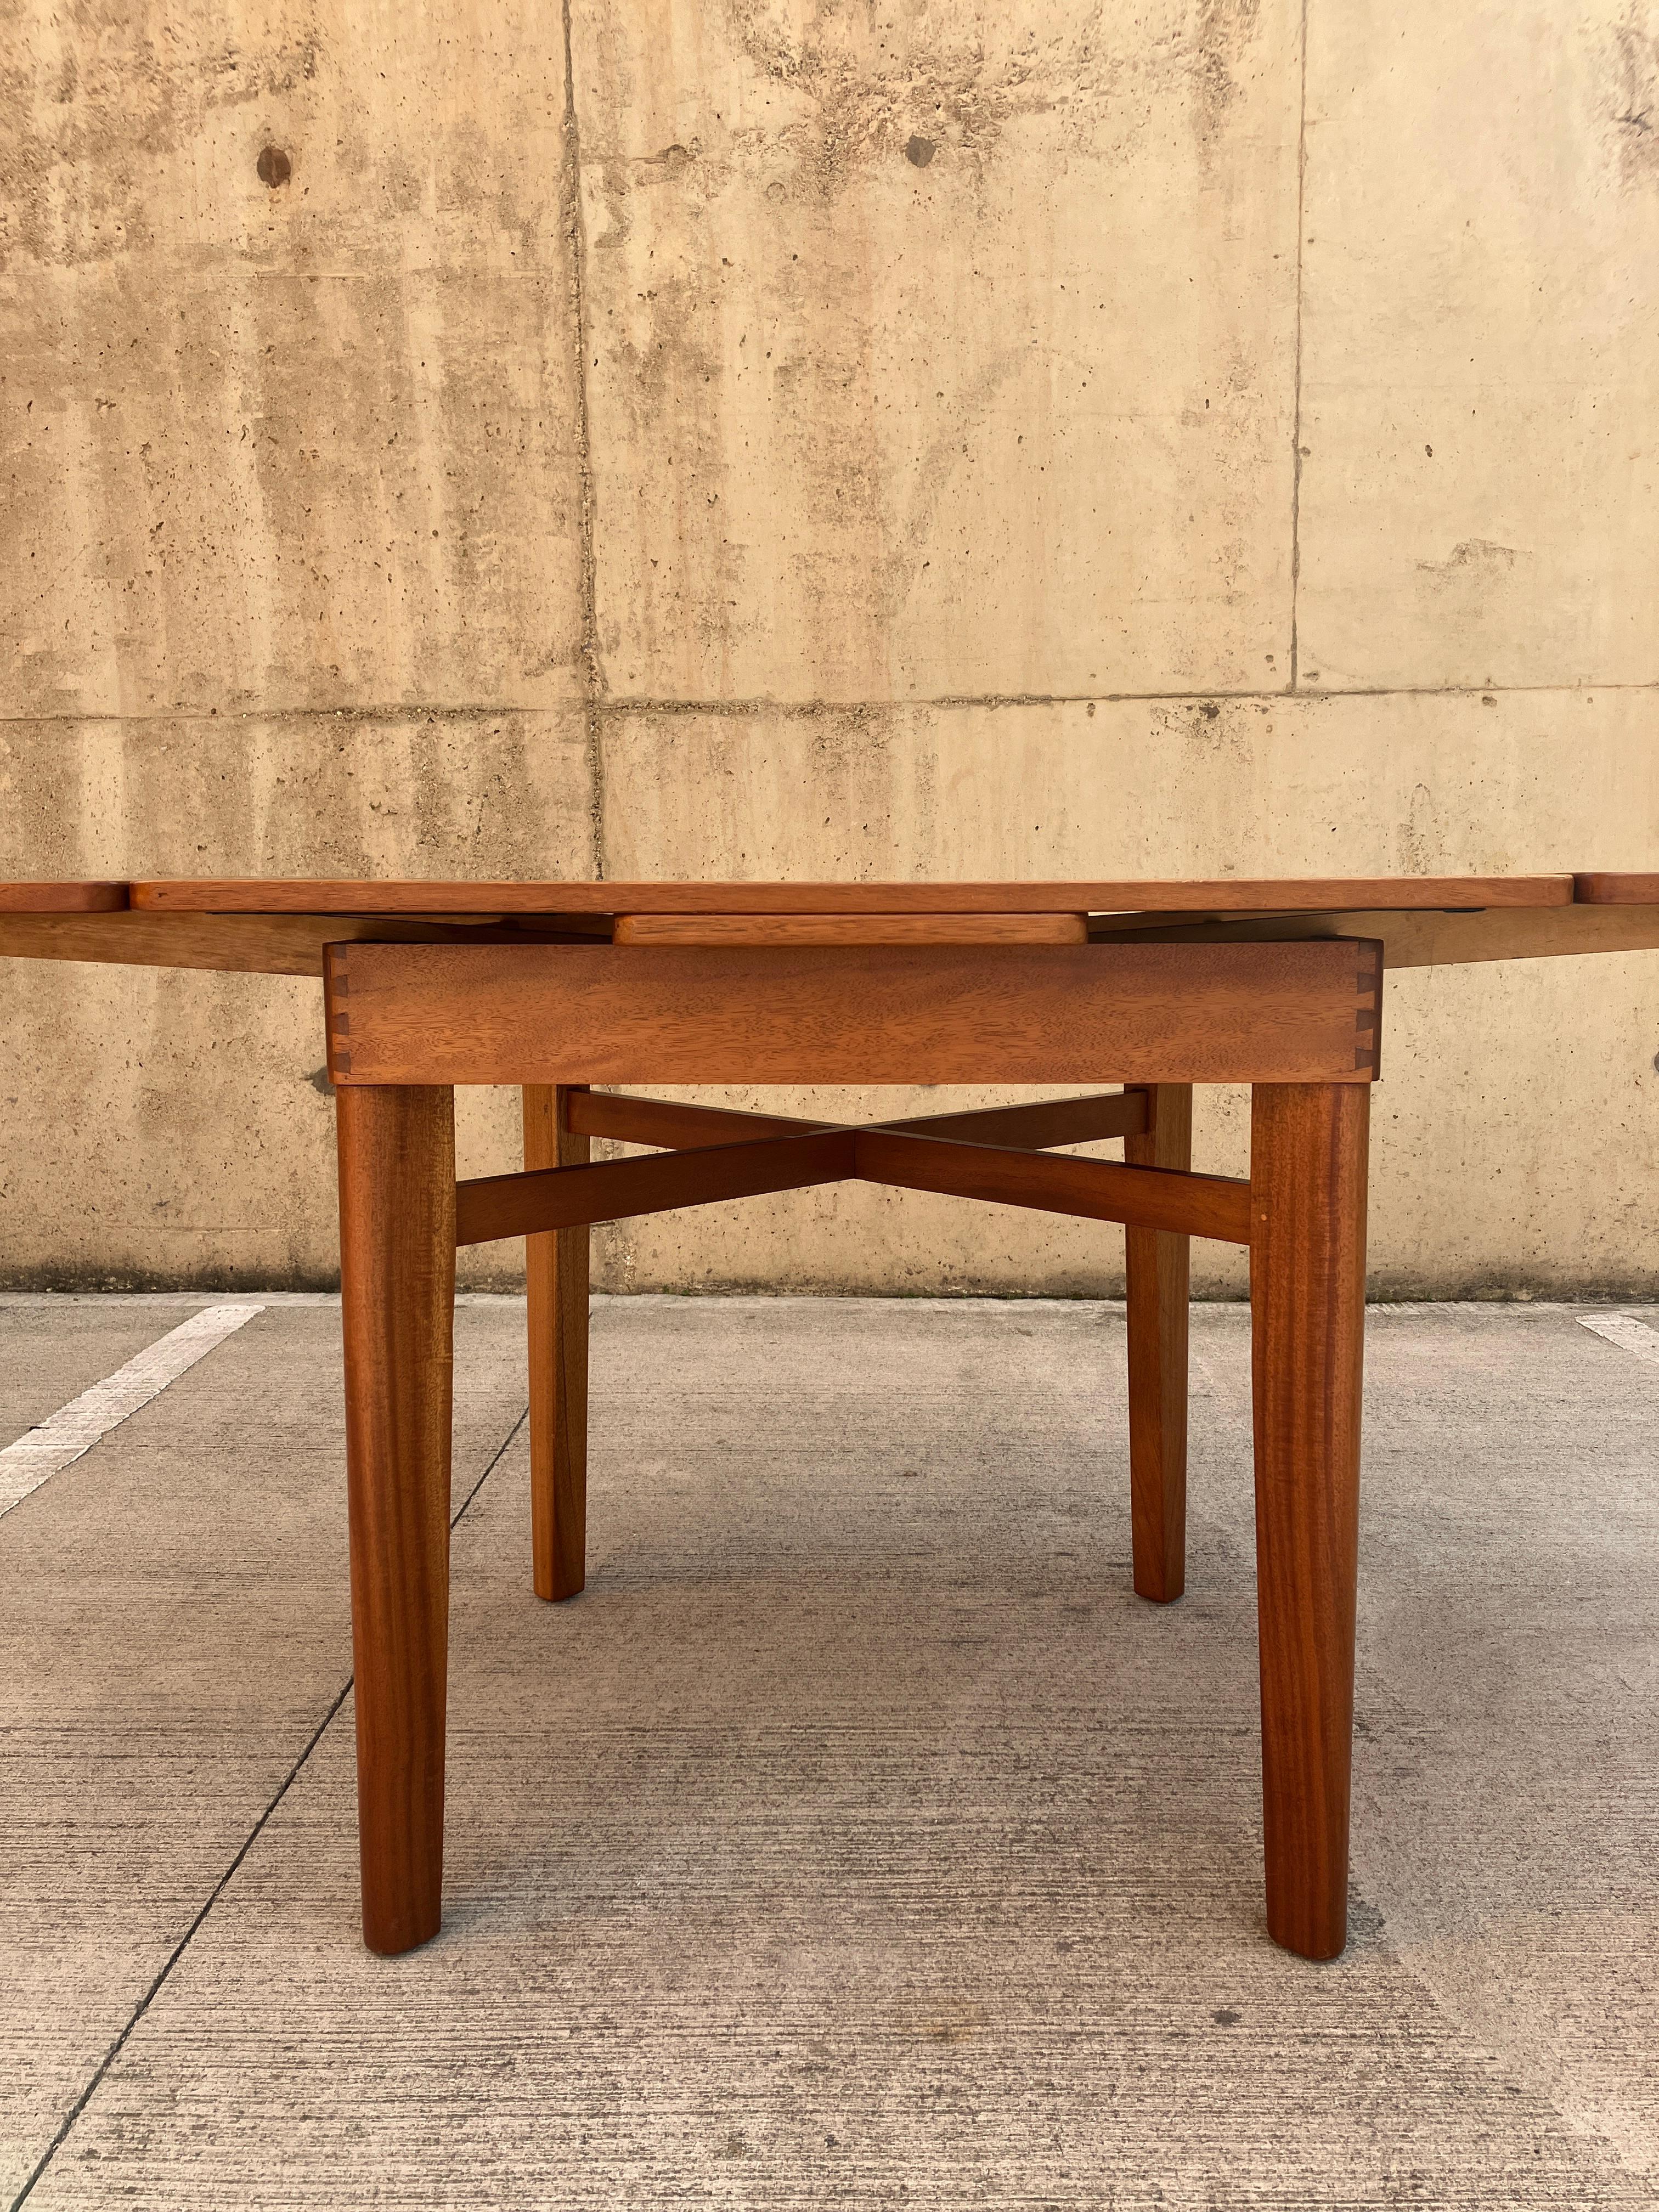 This a very rare, early mid-century dining table designed by Lucian Ercolani for Ercol. The table has plenty of attractive details and is incredibly well crafted. The dining table looks square when closed with a gorgeous cross under the tabletop.